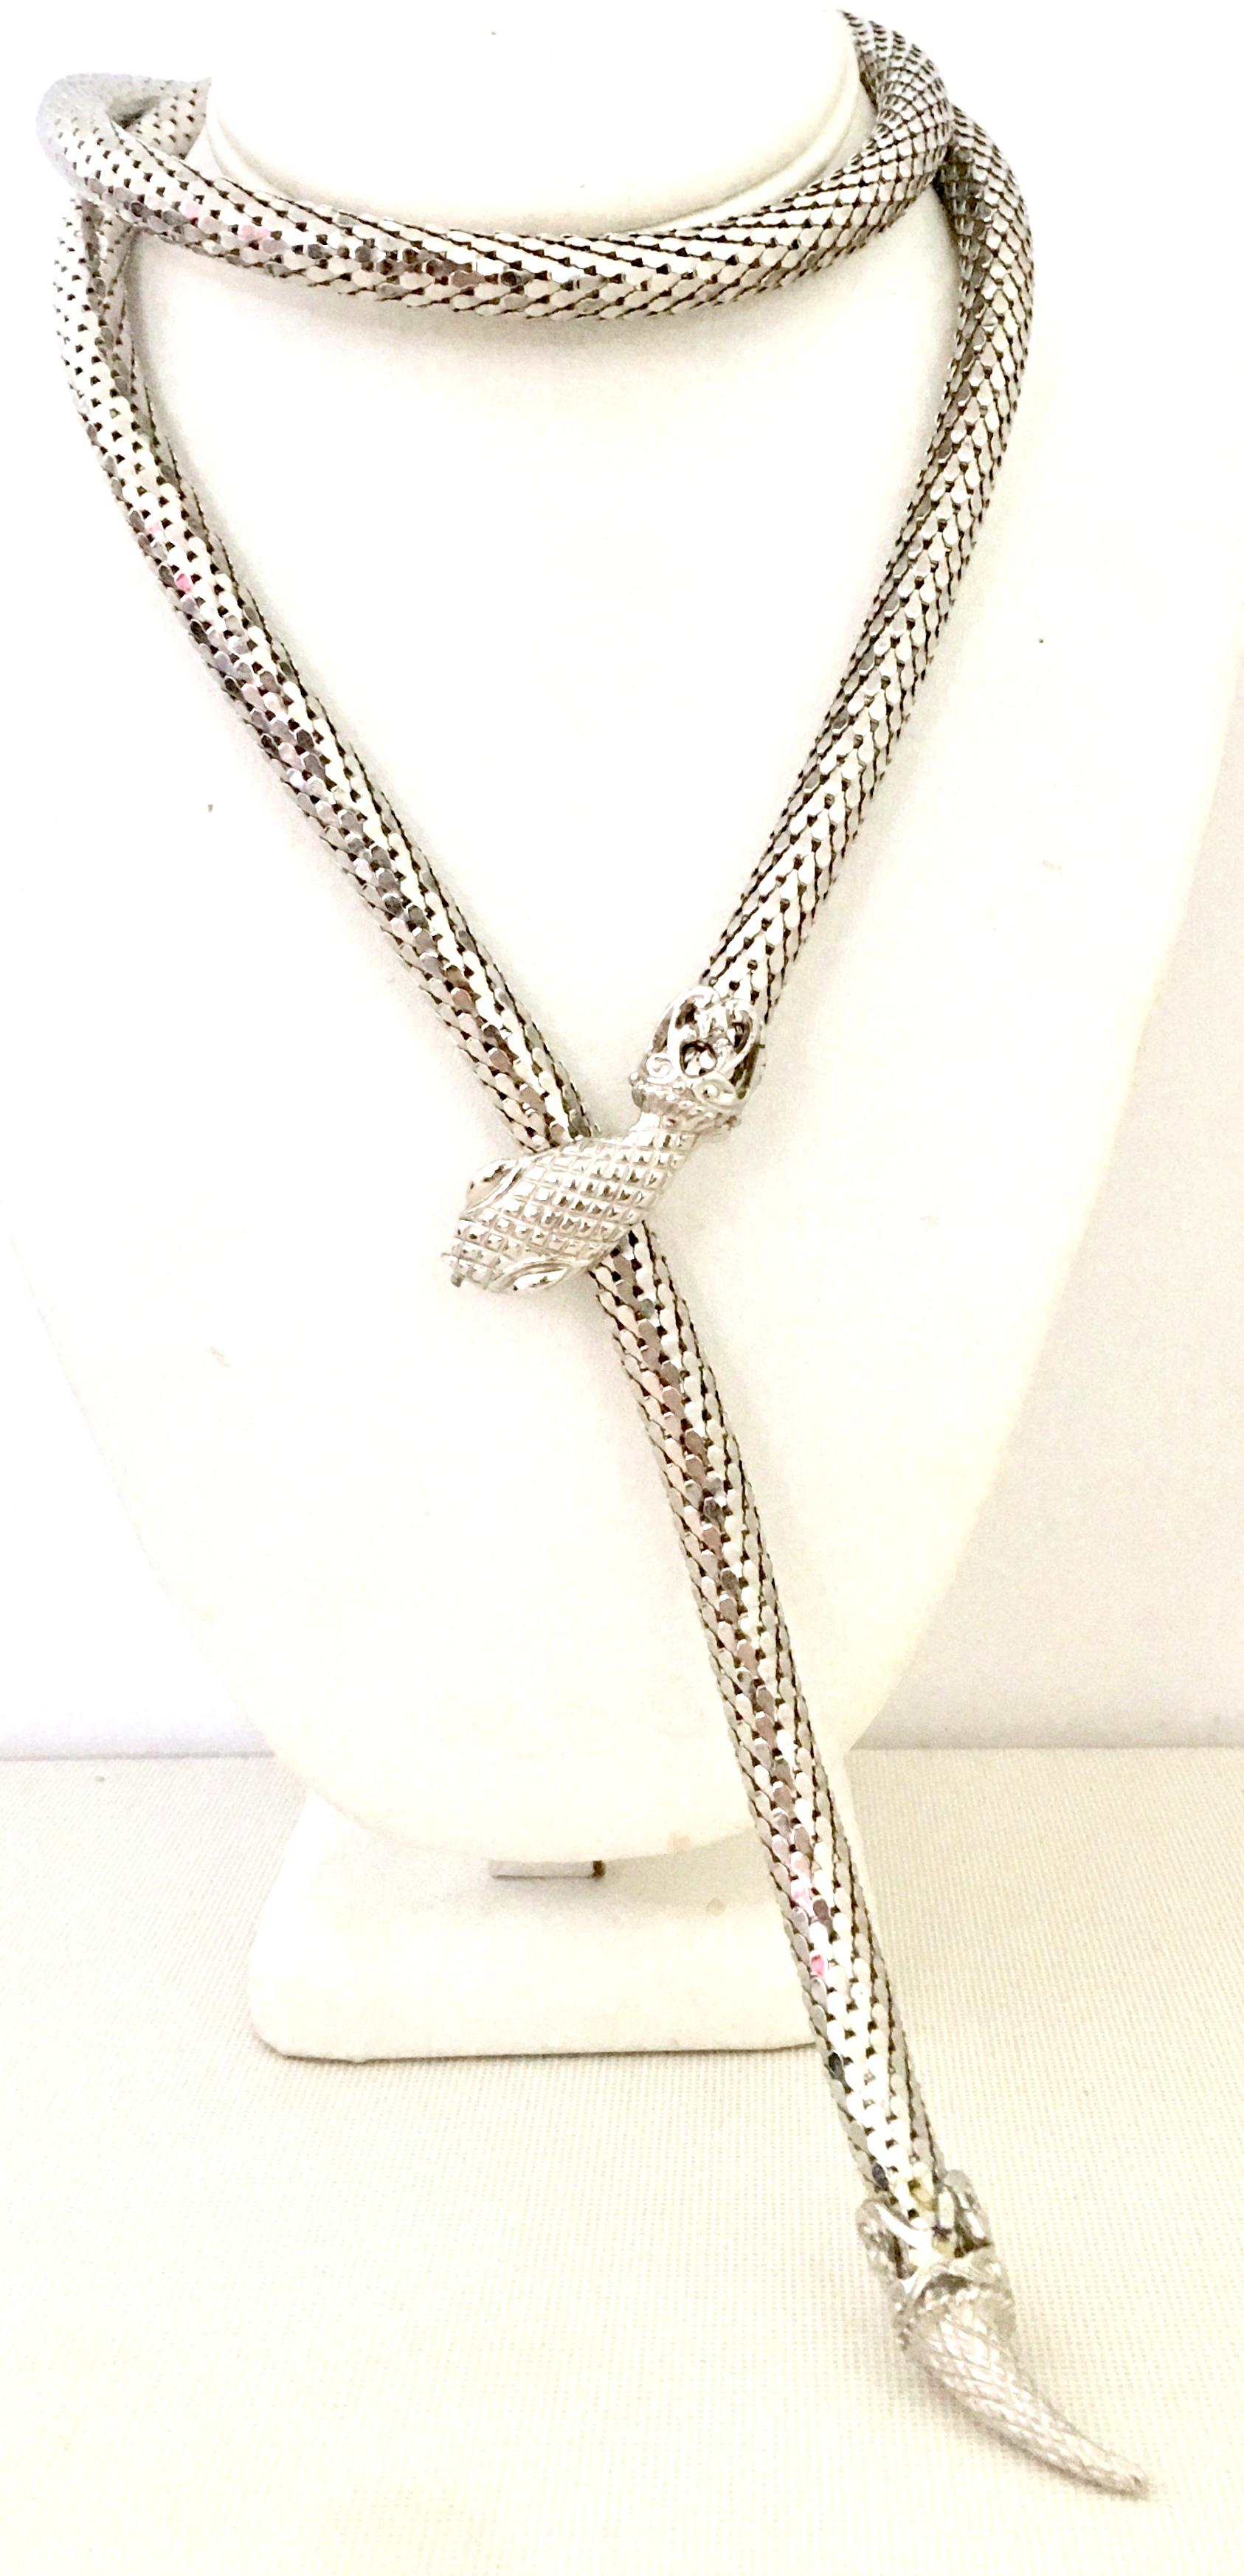 20th Century Silver Metal Mesh Snake Necklace Or Belt By, Whiting & Davis. This iconic and classic 39